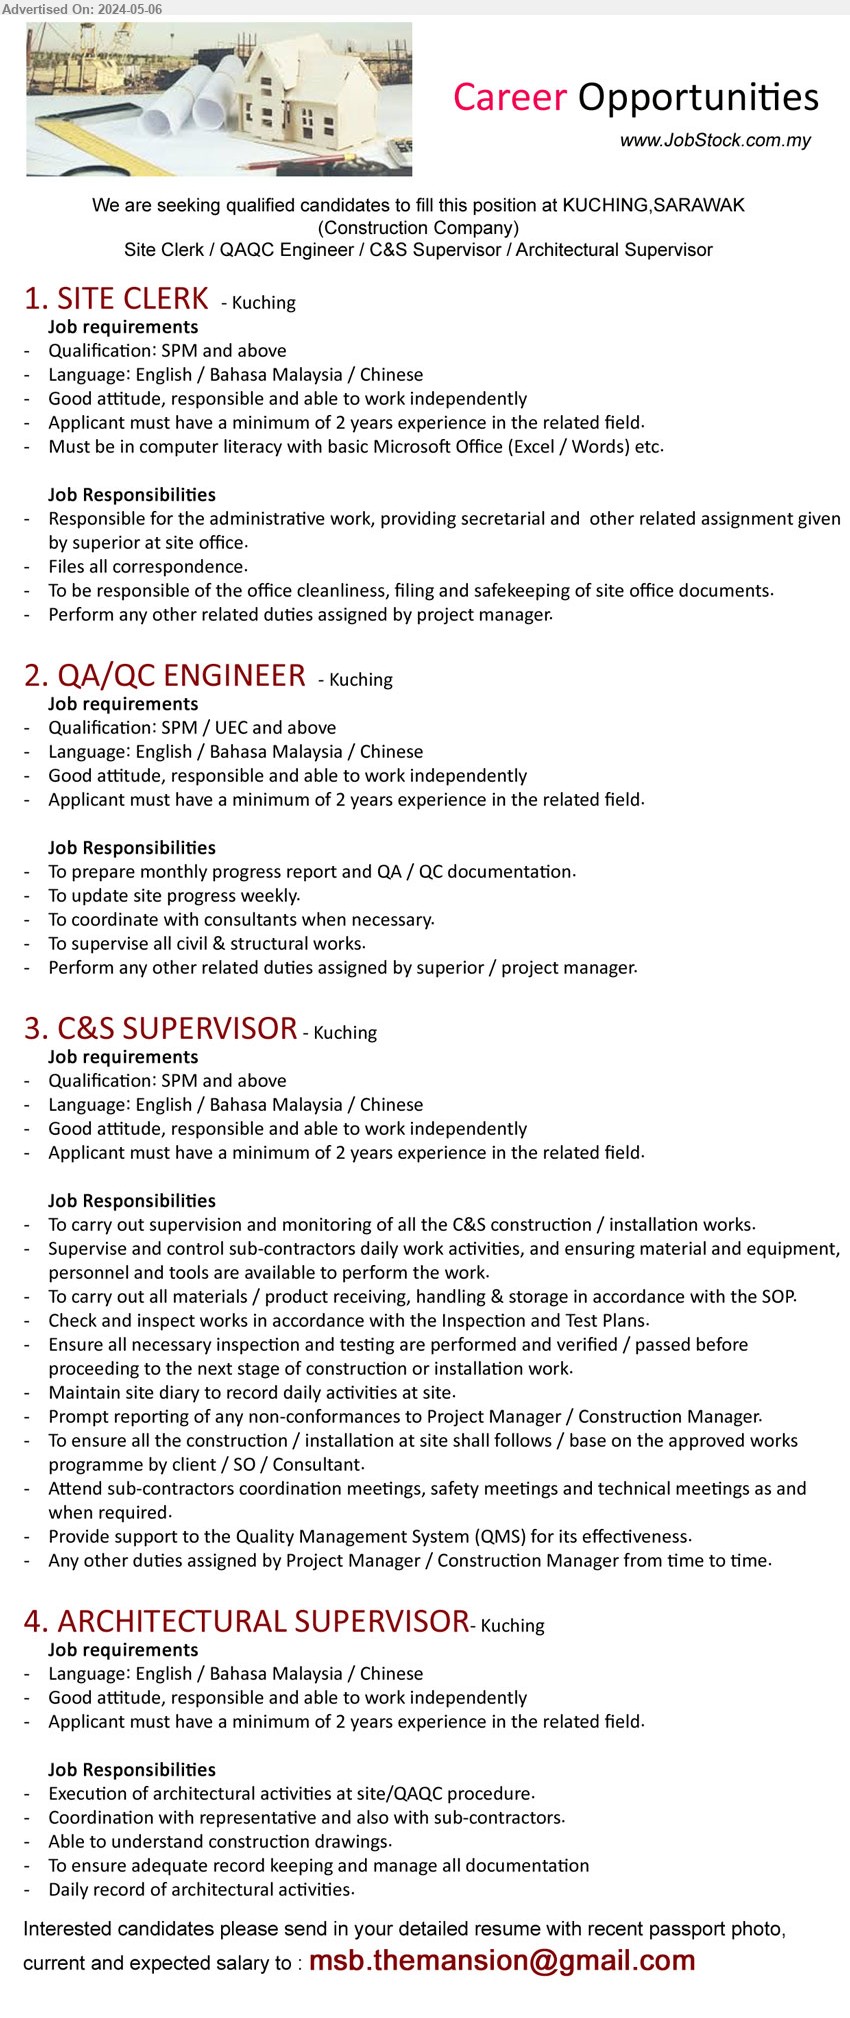 ADVERTISER (Construction Company) - 1. SITE CLERK (Kuching), SPM, Must be in computer literacy with basic Microsoft Office (Excel / Words) etc.,...
2. QA/QC ENGINEER (Kuching),  SPM / UEC and above, 2 yrs. exp., To prepare monthly progress report and QA / QC documentation.,...
3. C&S SUPERVISOR (Kuching), SPM & above. To carry out supervision and monitoring of all the C&S construction / installation works,...
4. ARCHITECTURAL SUPERVISOR (Kuching), 2 yrs. exp., Execution of architectural activities at site/QAQC procedure.,...
Email resume to ...